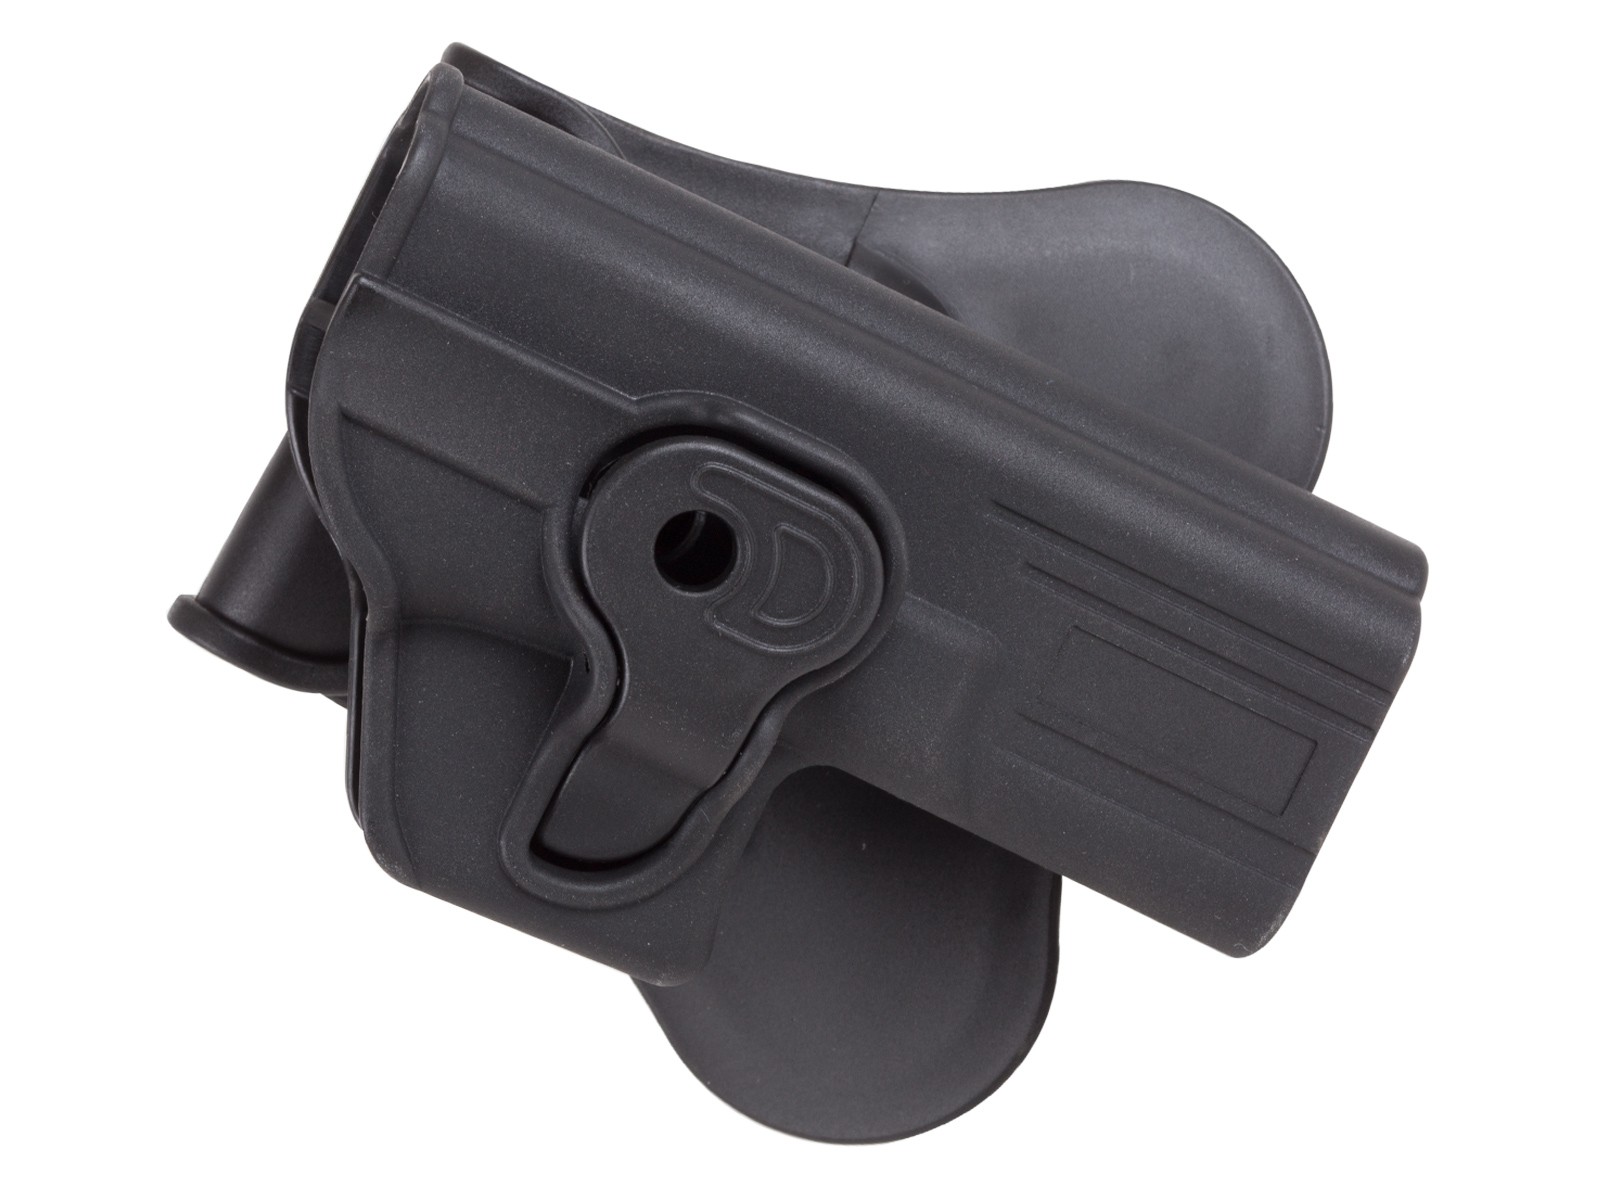 ASG/Strike Systems Paddle Polymer Holster for G17, G19, 23, & M-22 Air & Airsoft Pistols, Black